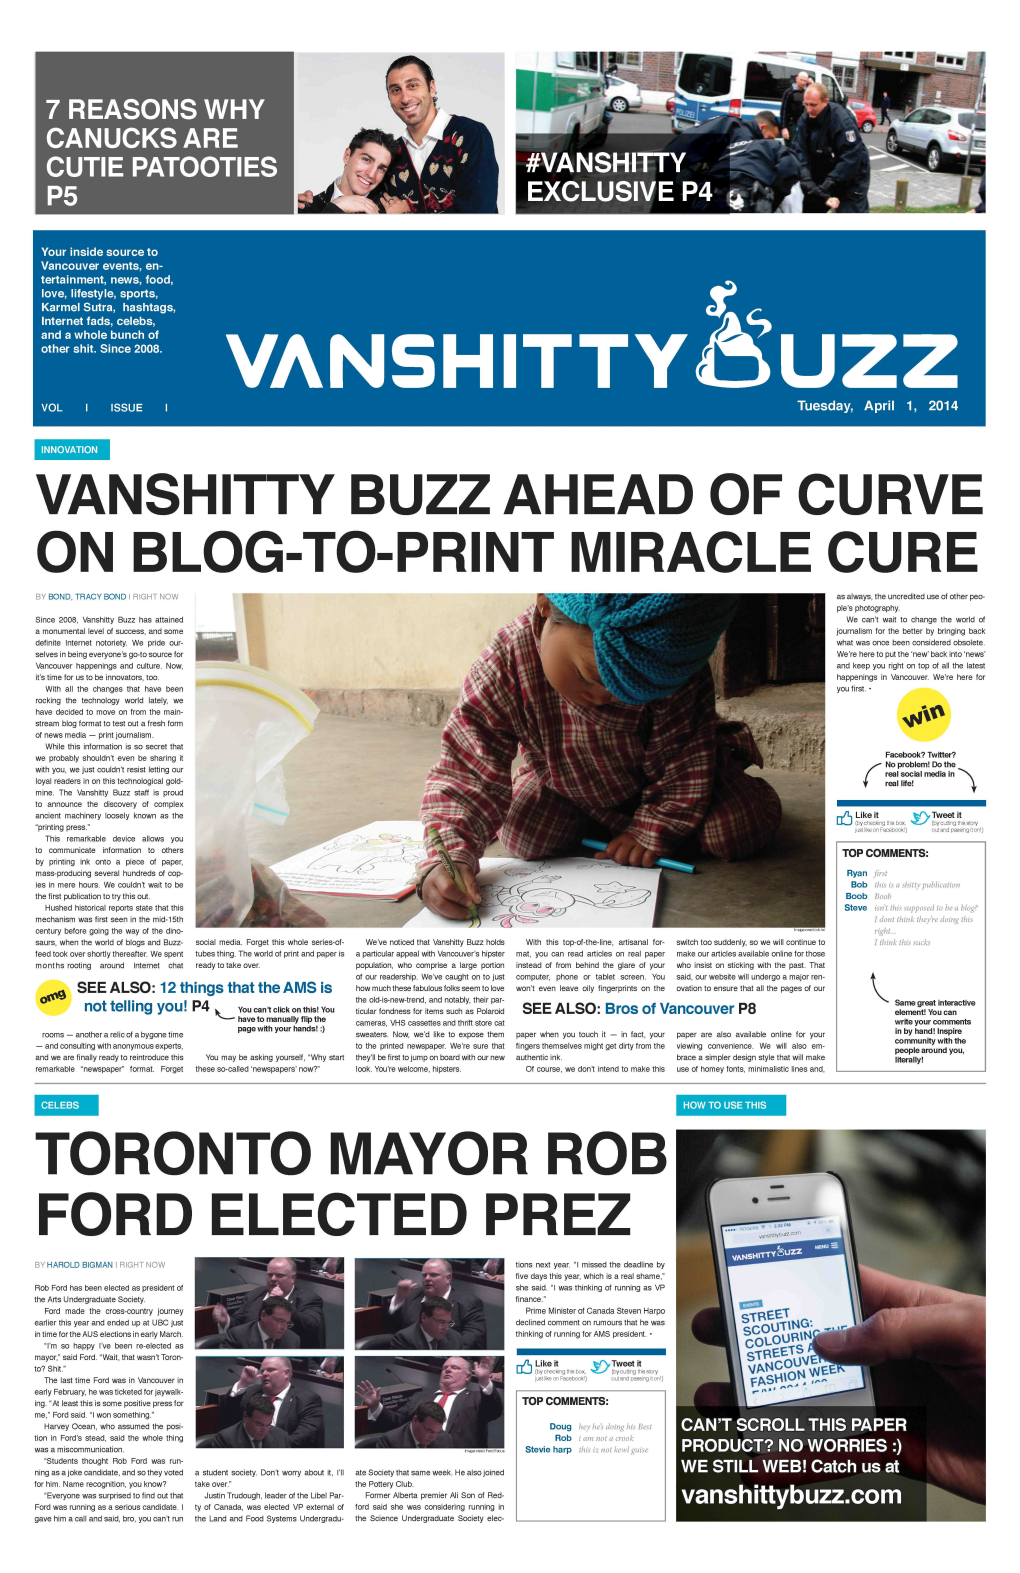 Vanshitty Buzz Ahead of Curve on Blog-To-Print Miracle Cure